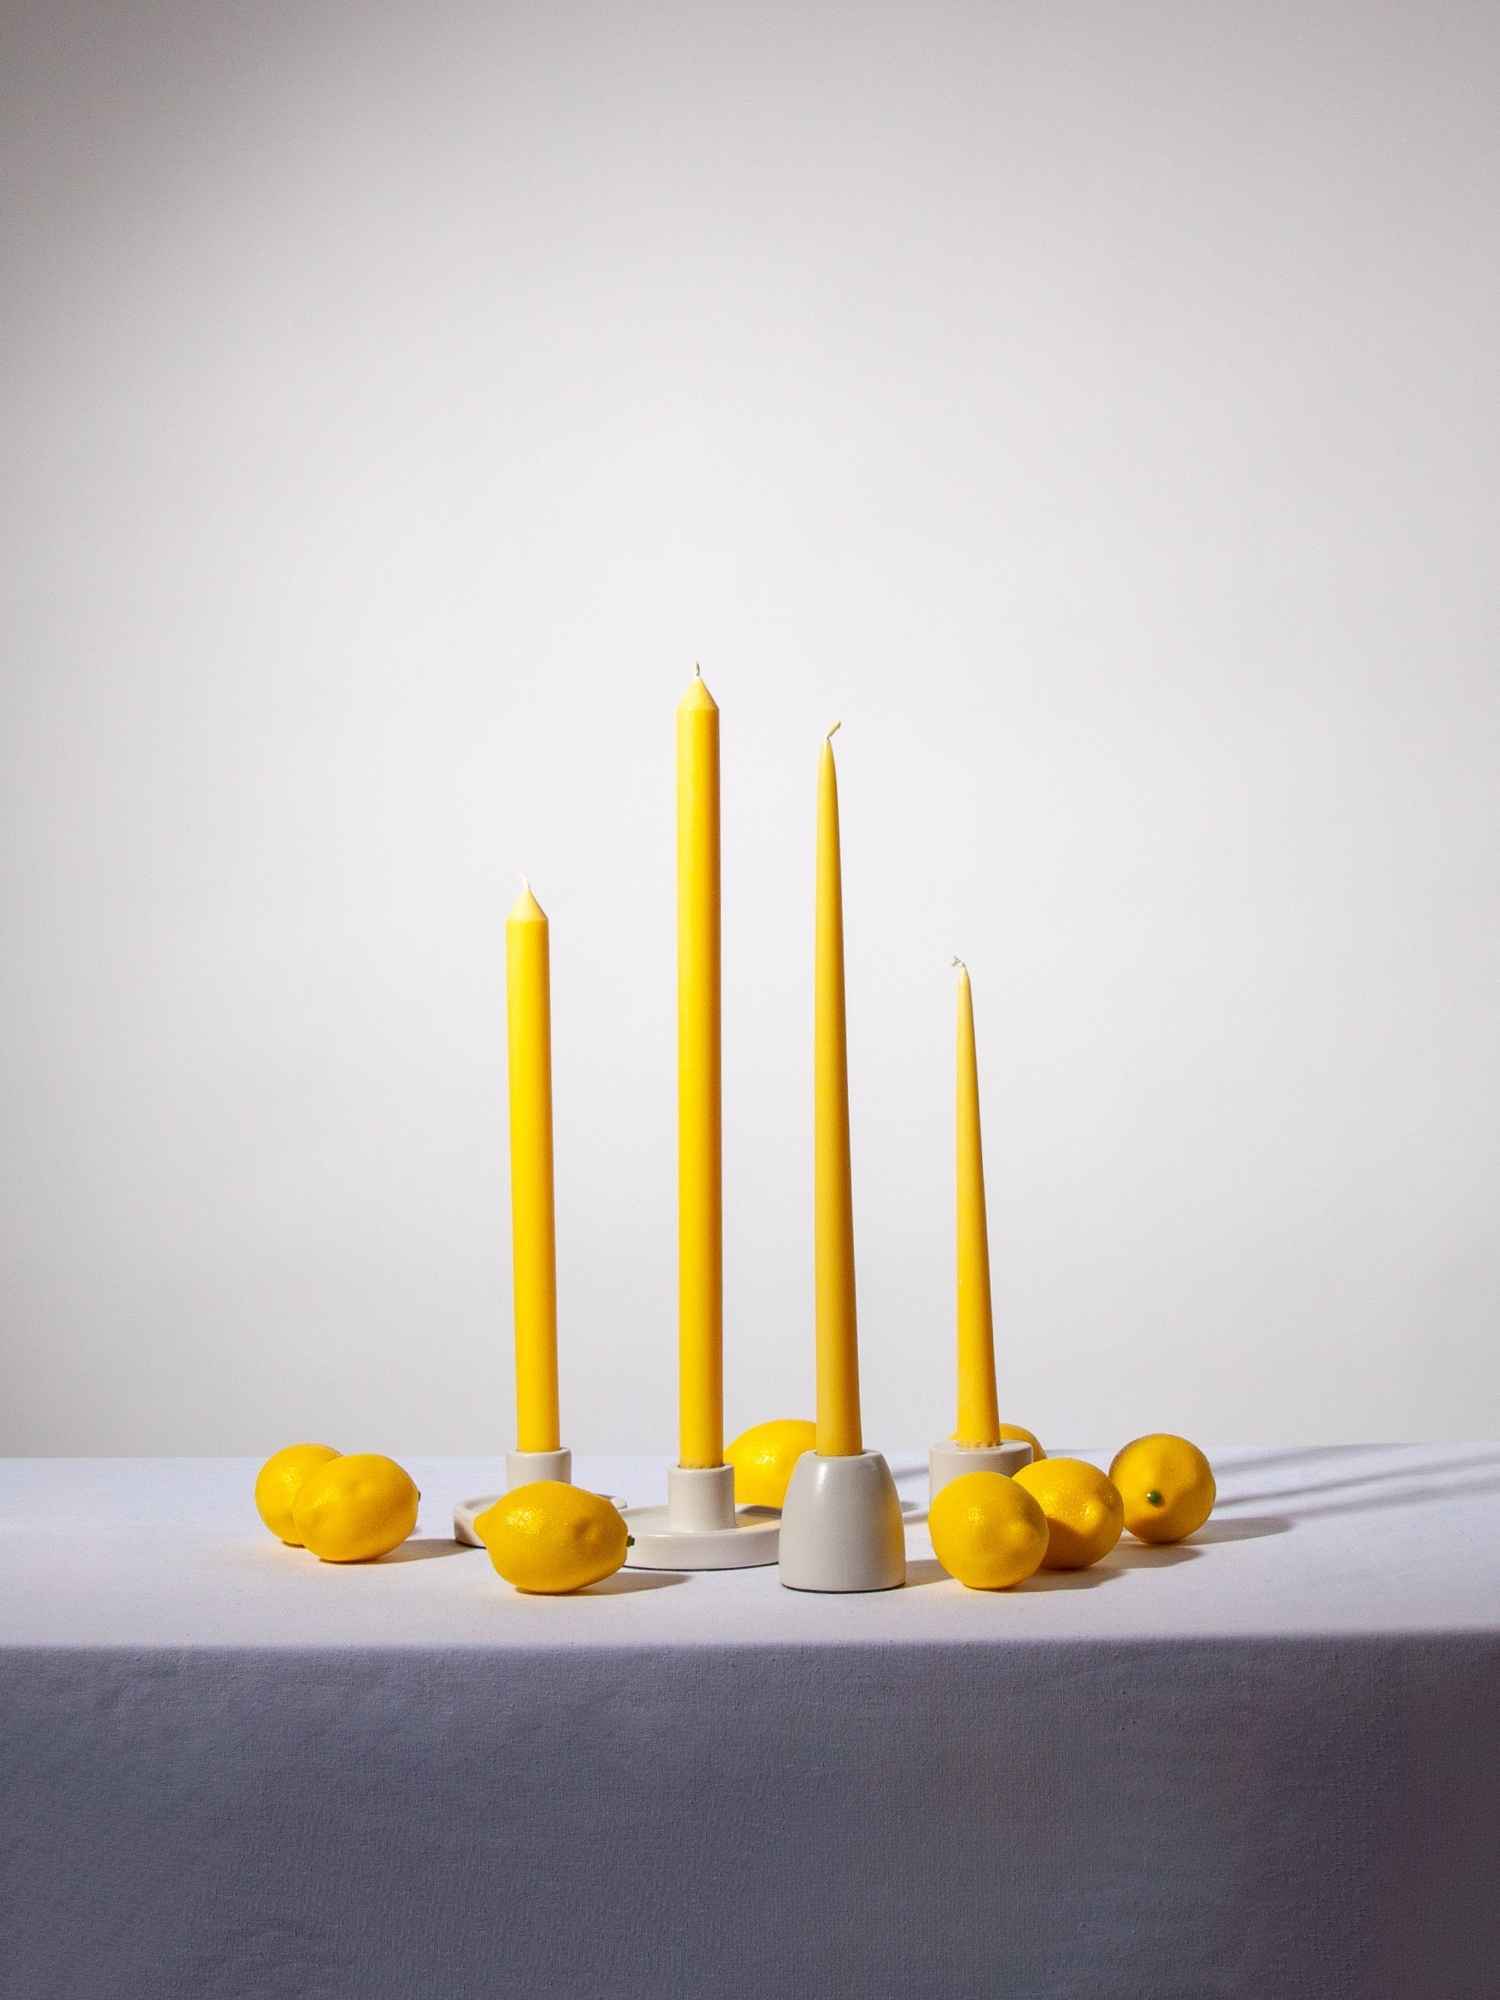 Yellow 40cm Dinner Candle, Pack of 4